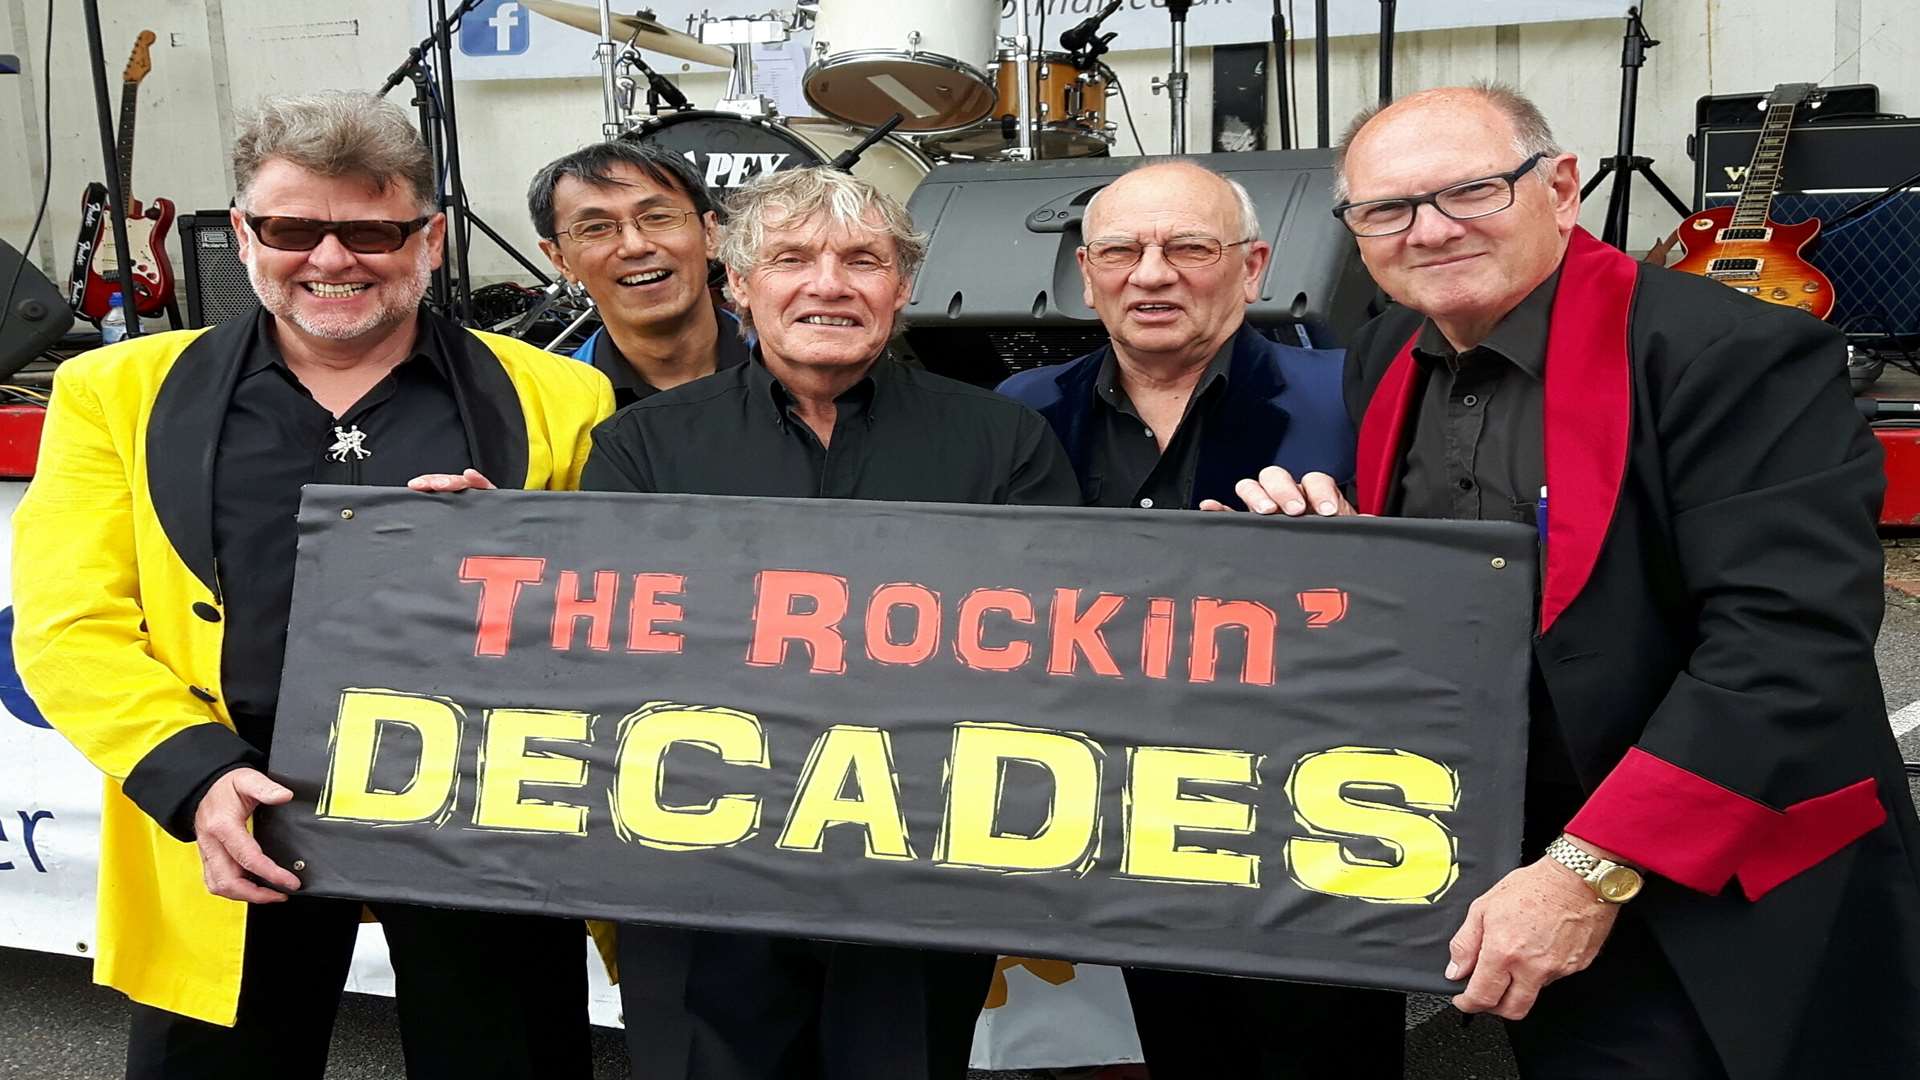 The Rockin' Decades will open the show at 2pm